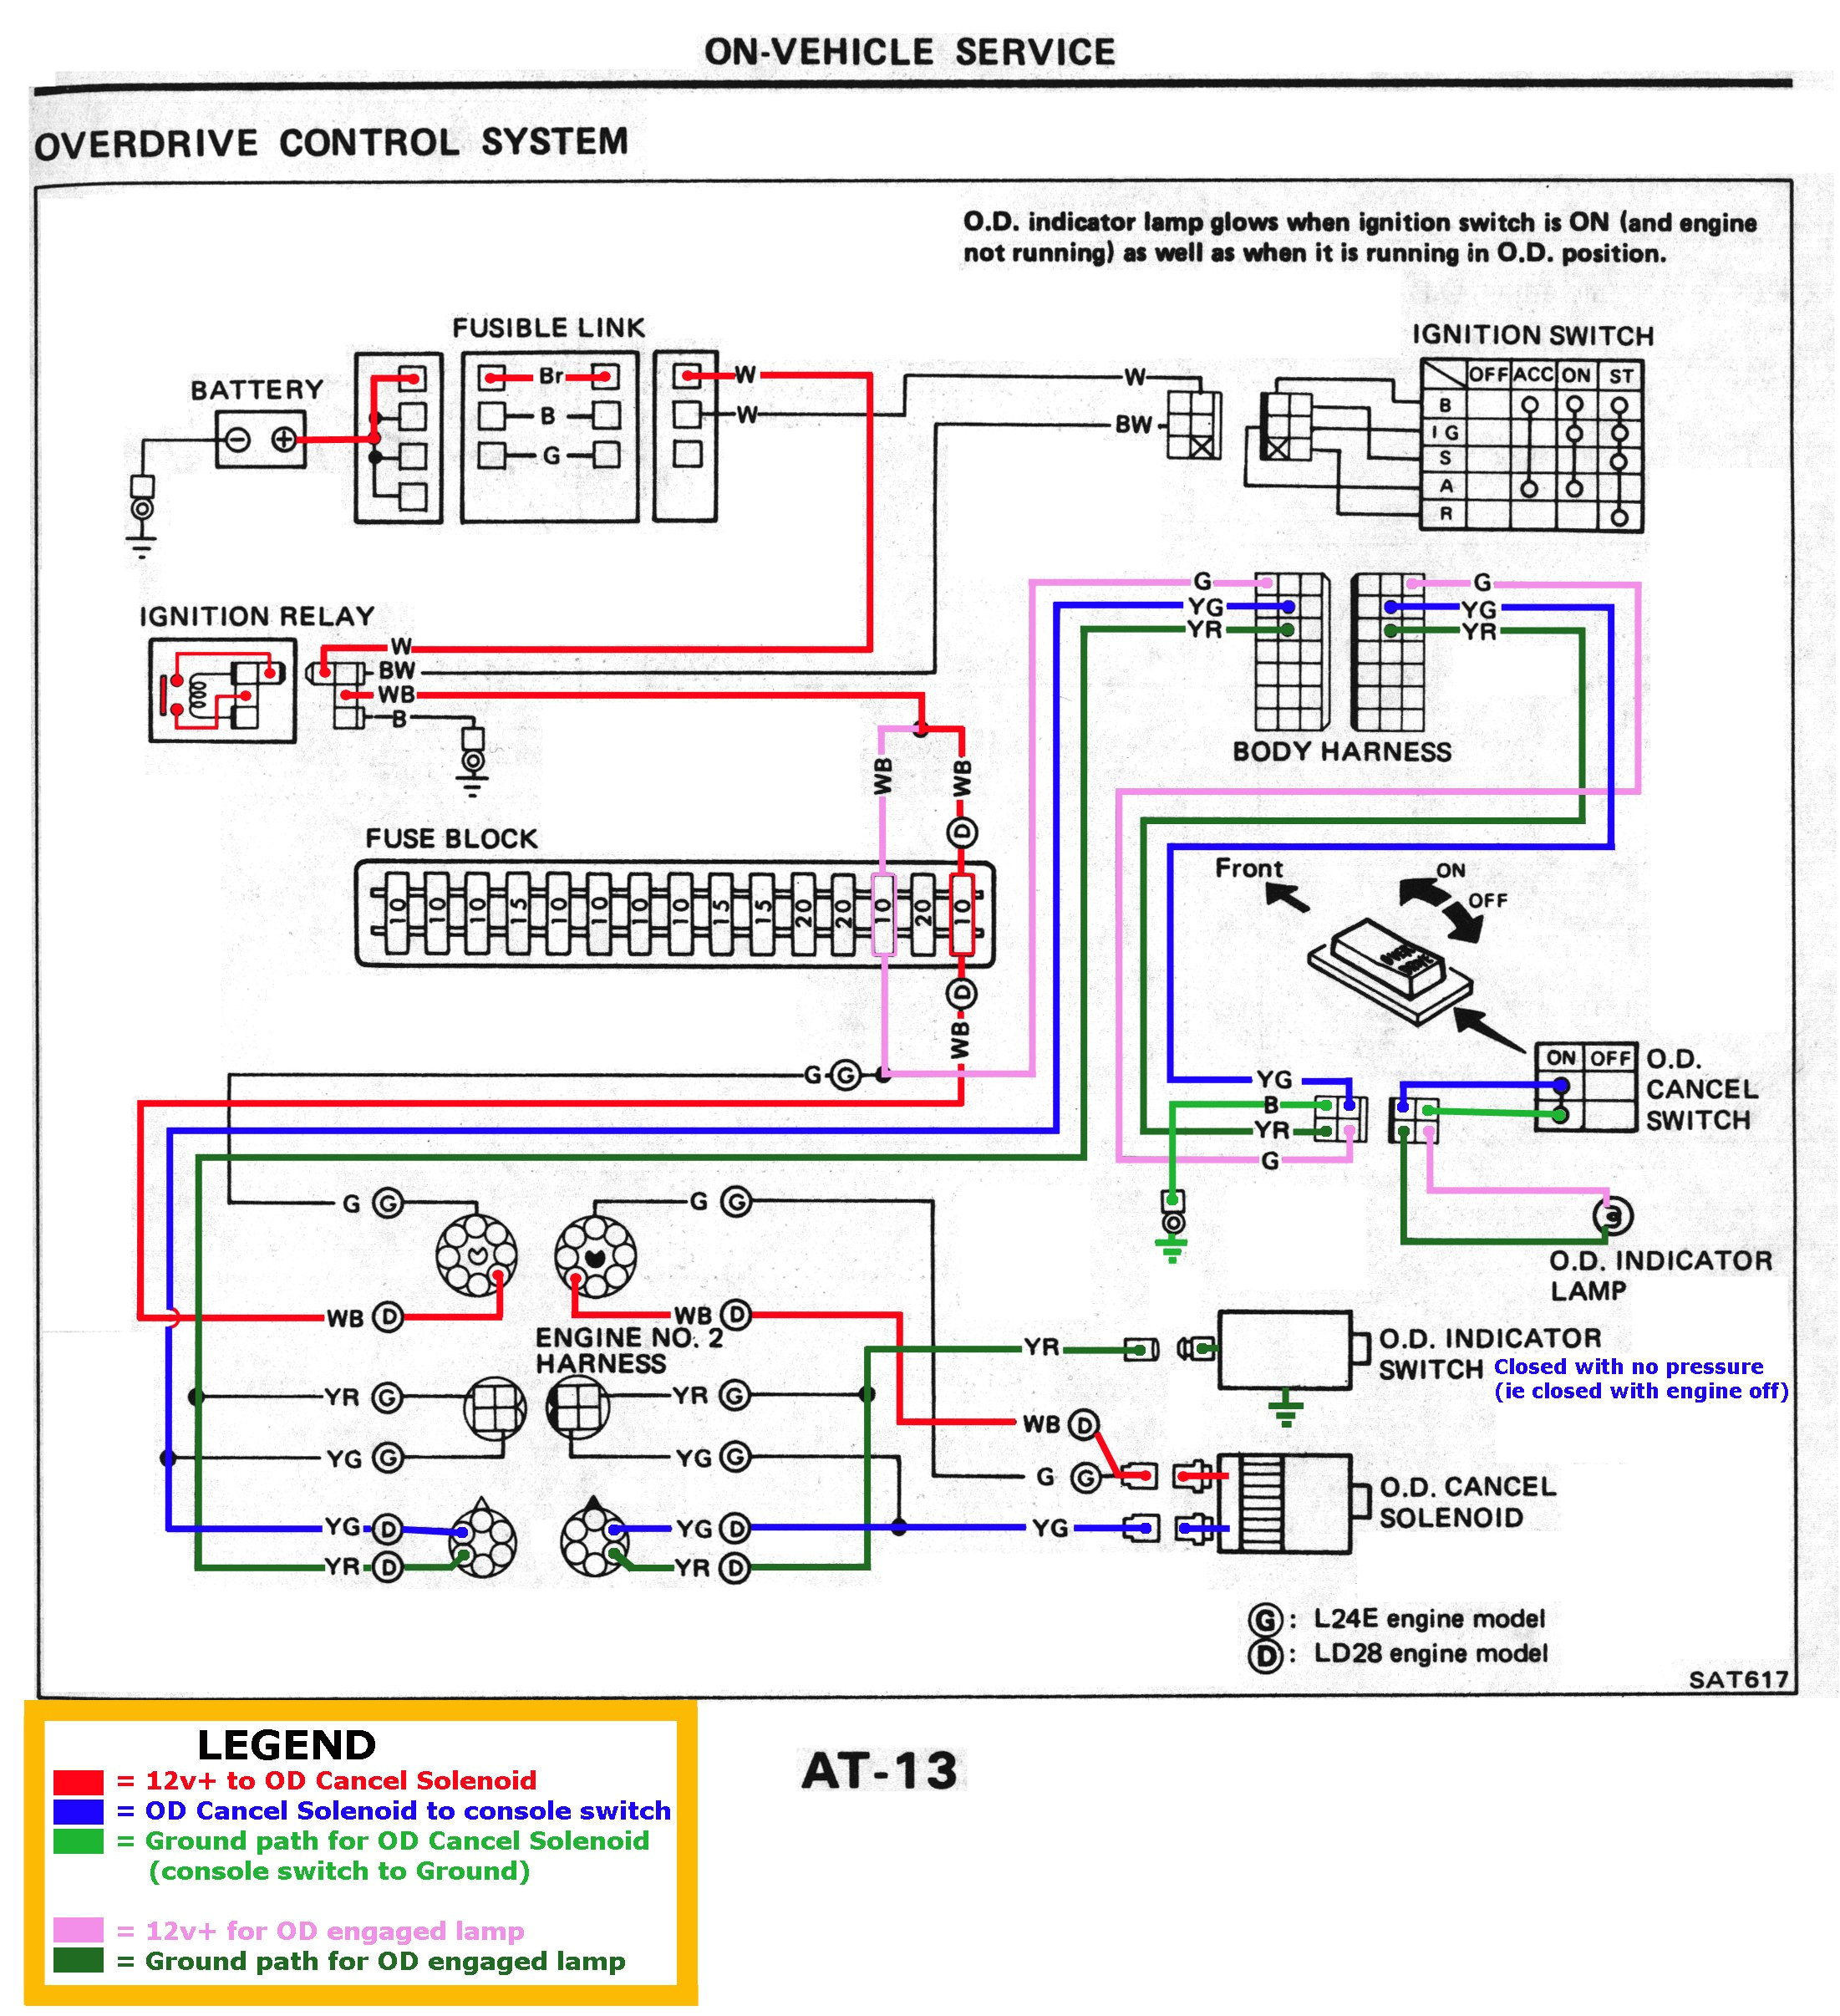 codes for electrical diagrams relay wiring wiring diagrams data electrical schematic wiring color